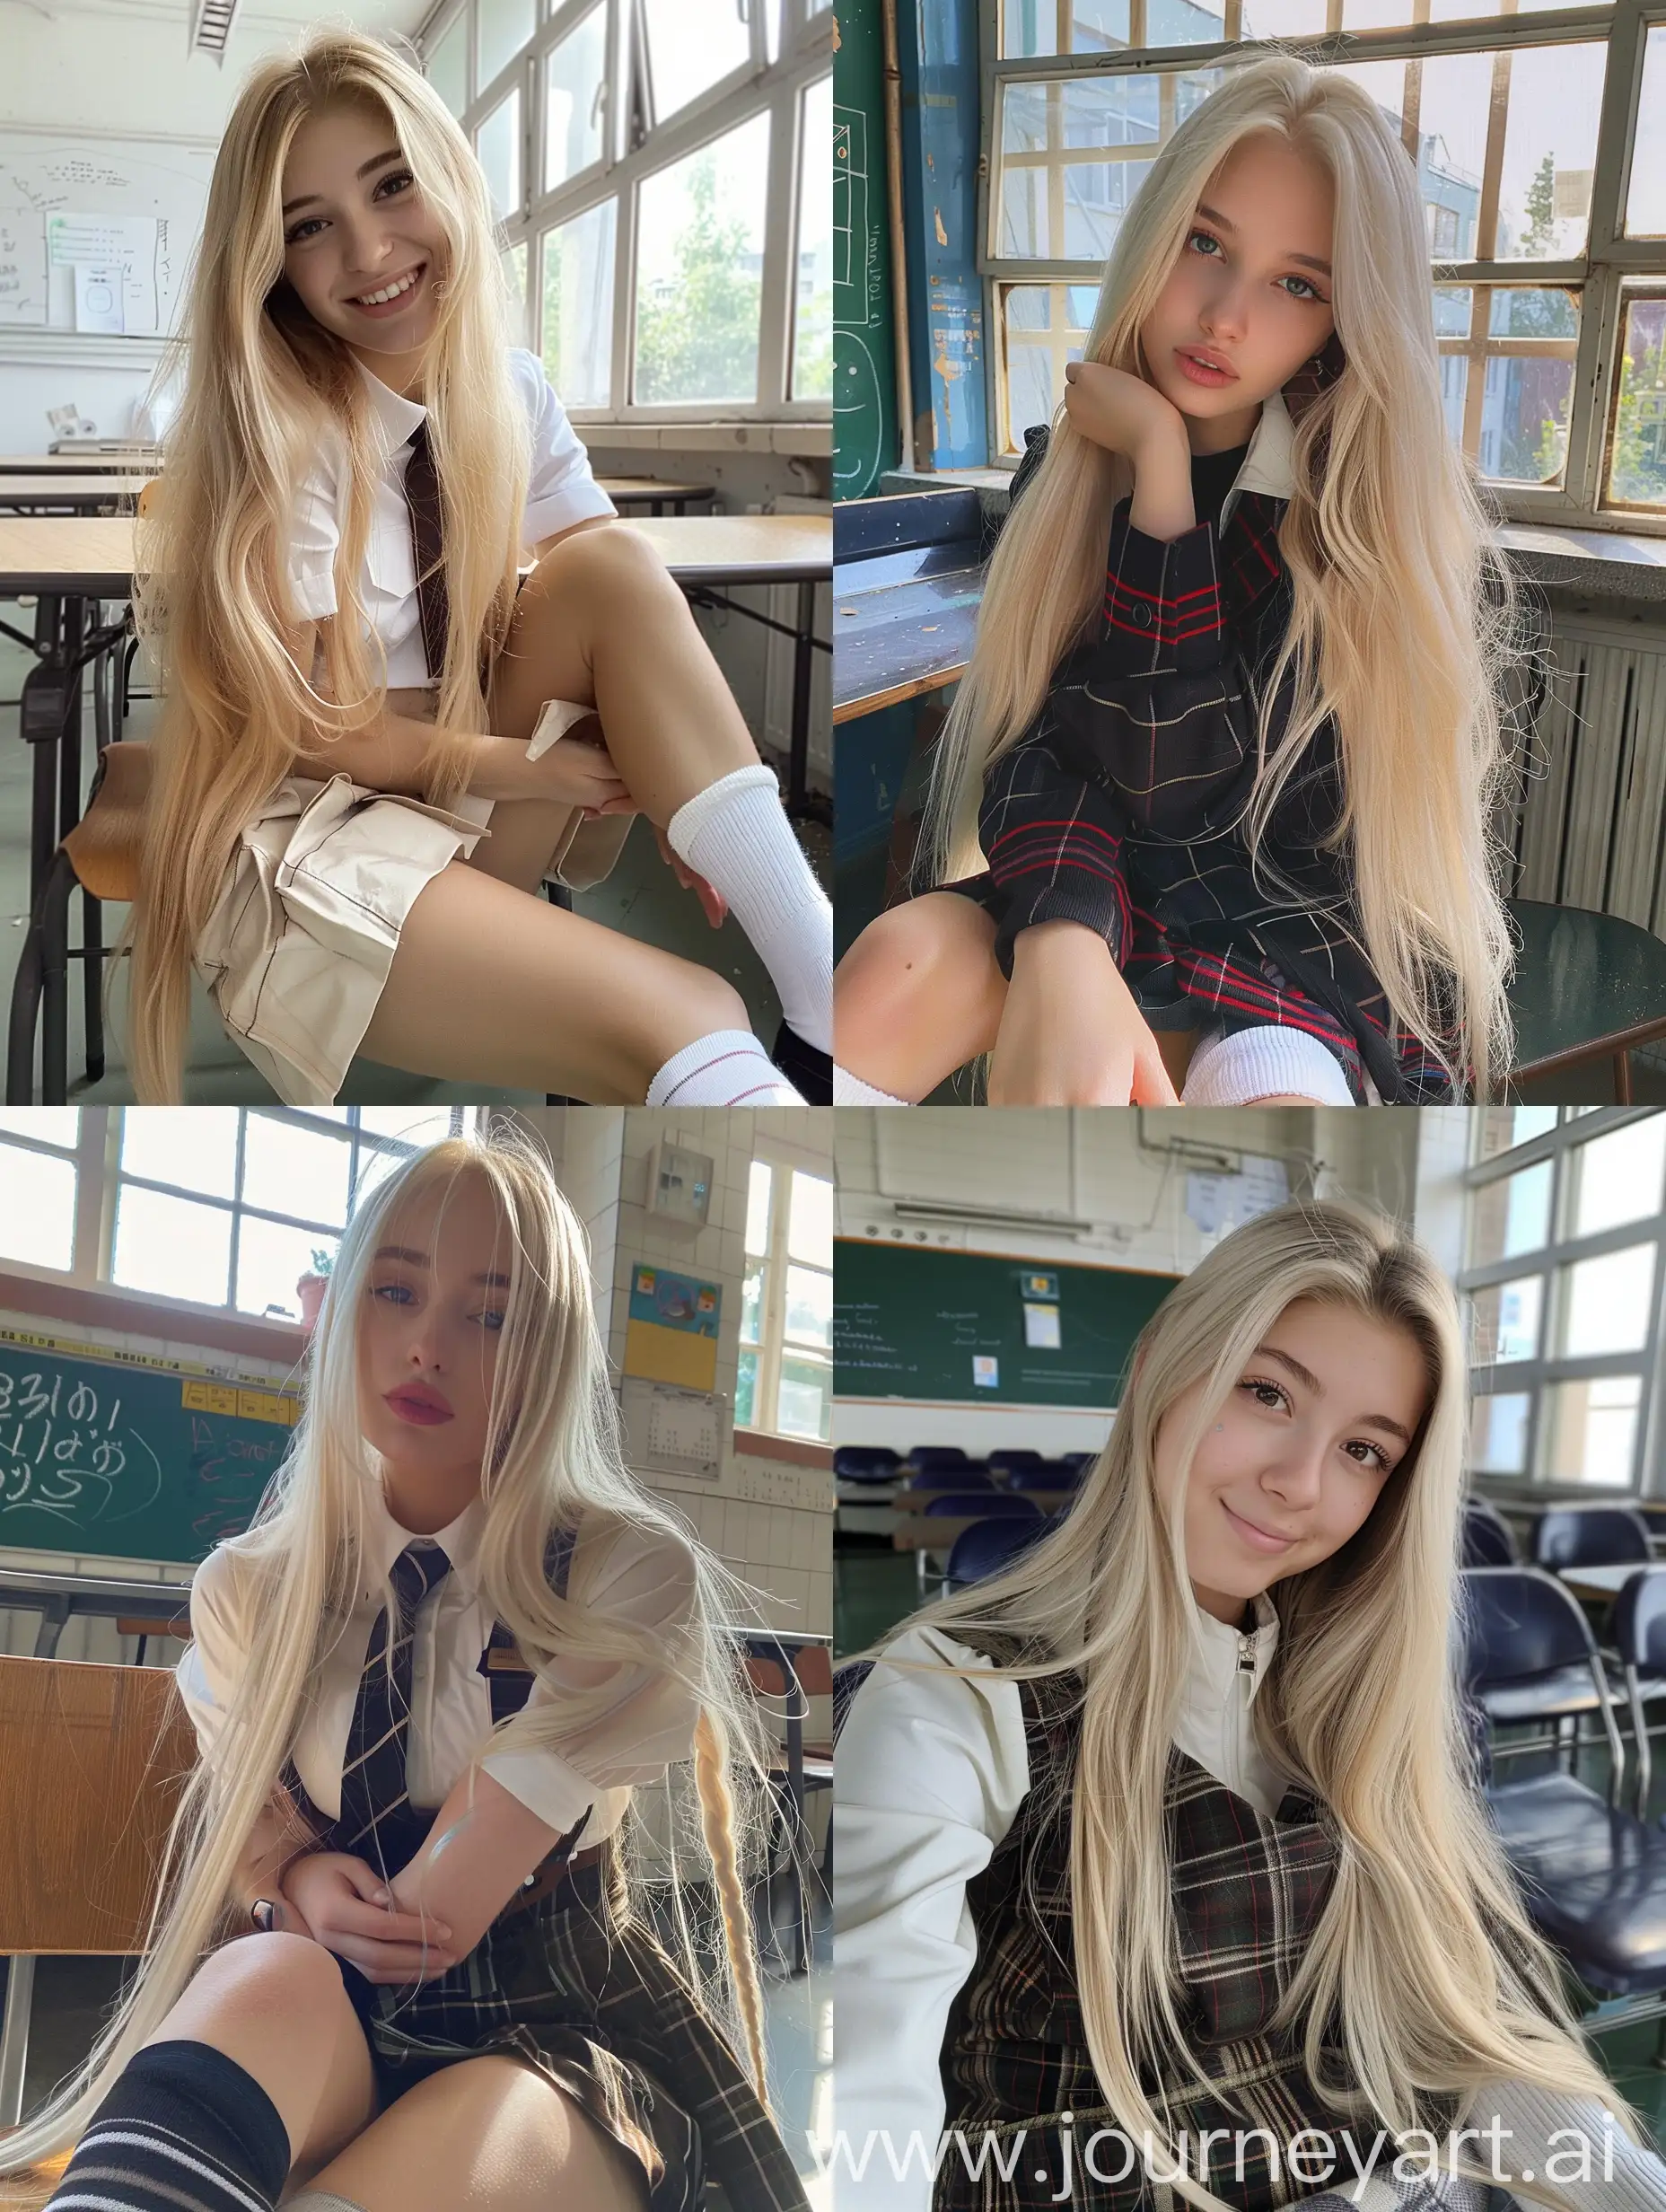 1 Ukrainian girl, long blond hair , 22 years old, influencer, beauty , in the school ,school japan  uniform , makeup, smiling, chão view, sitting on chair , socks and boots, no effect, selfie , iphone selfie, no filters , iphone photo natural